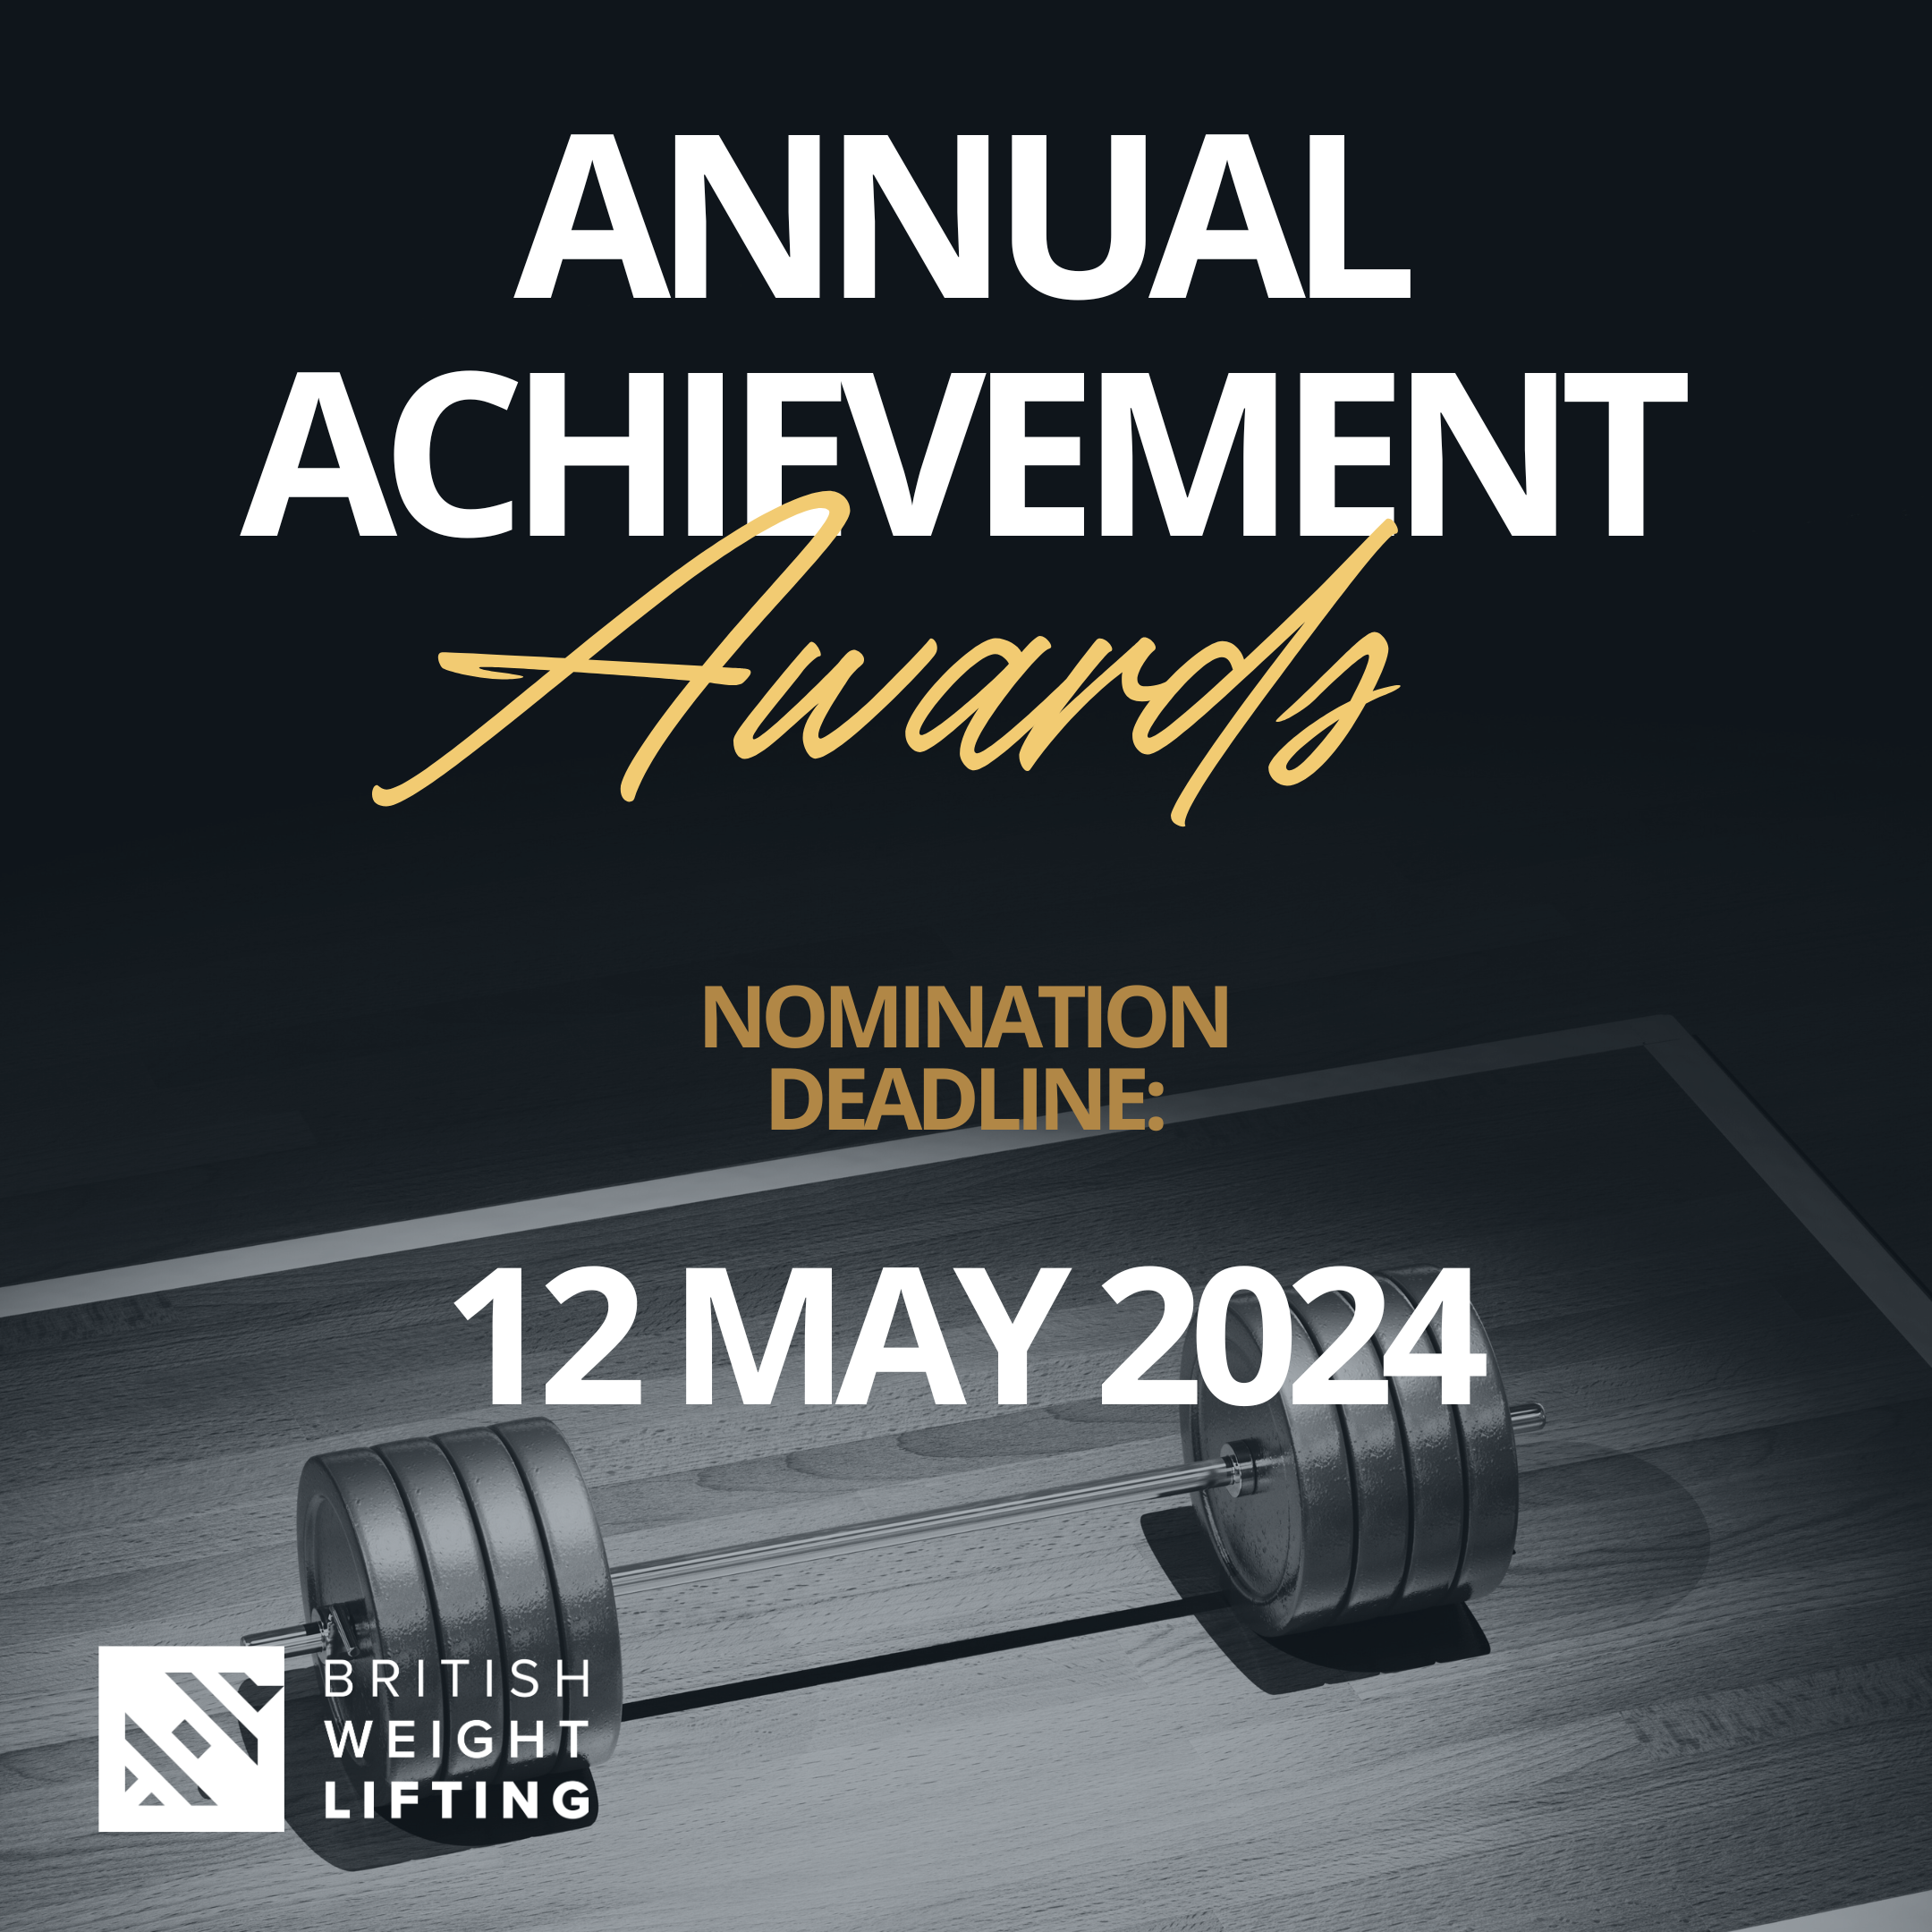 Nominations Open for the Annual Achievement Awards